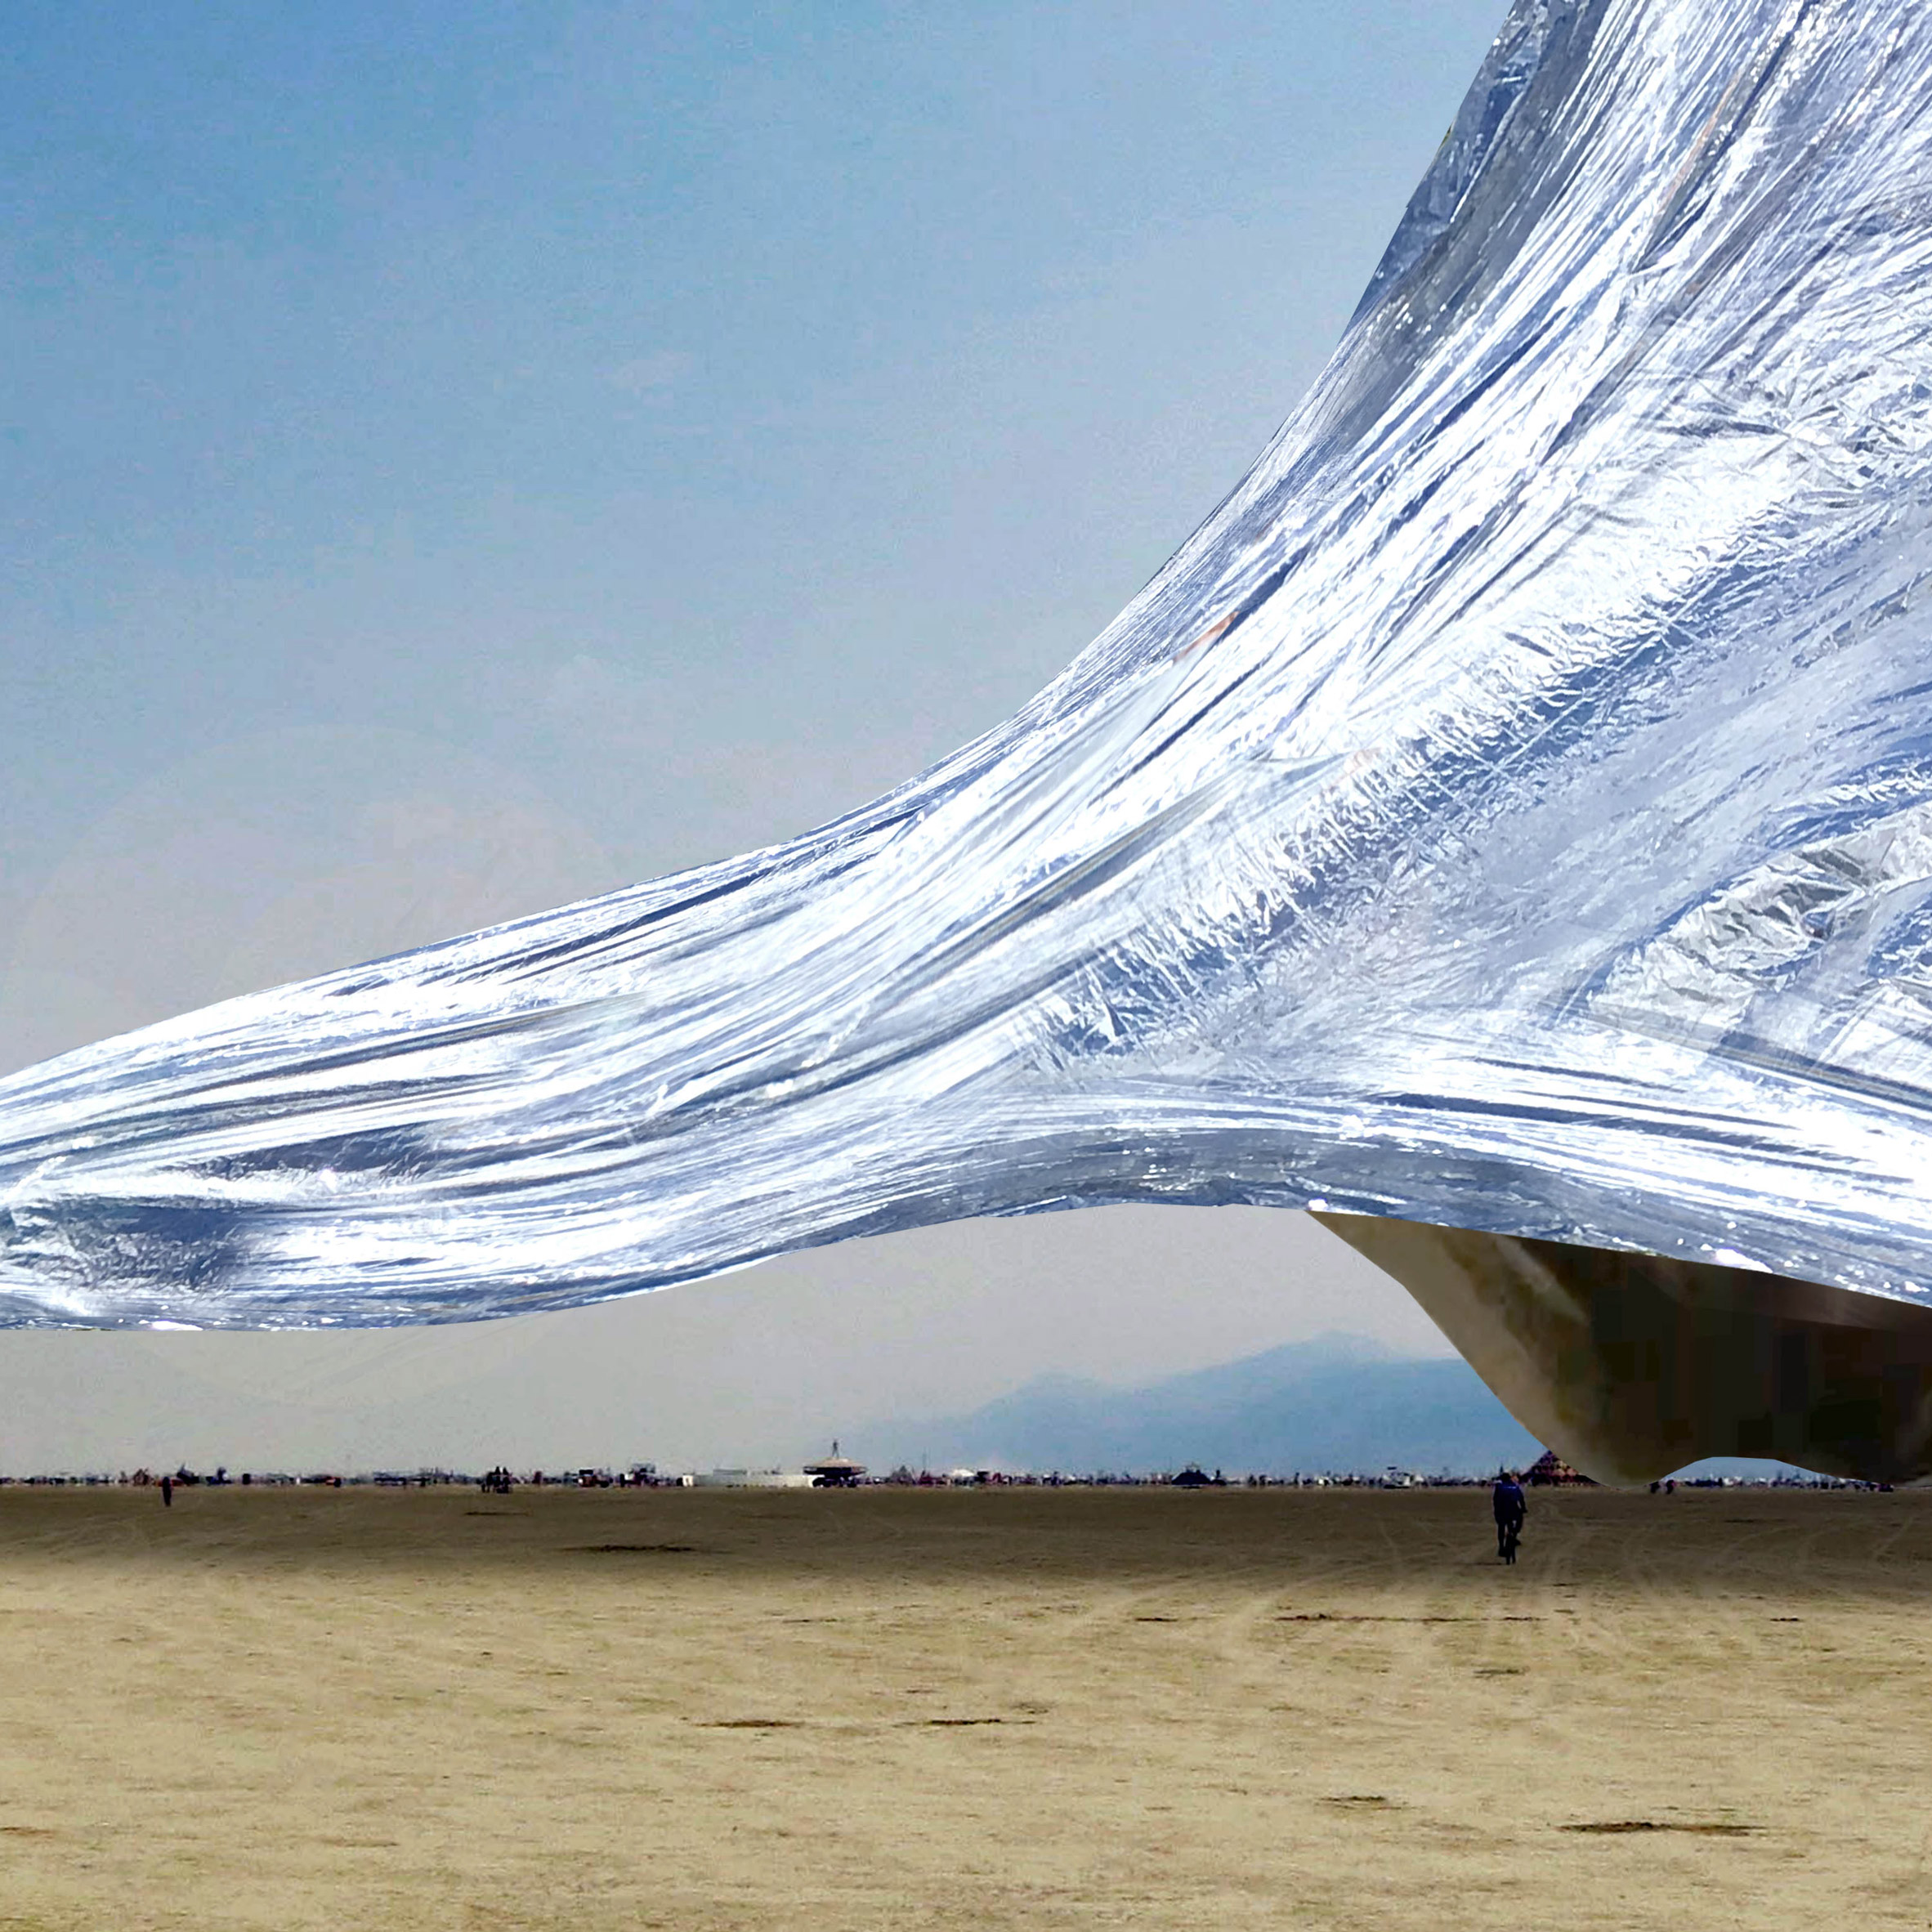 The Blanket at Burning Man by Alex Schtanuk